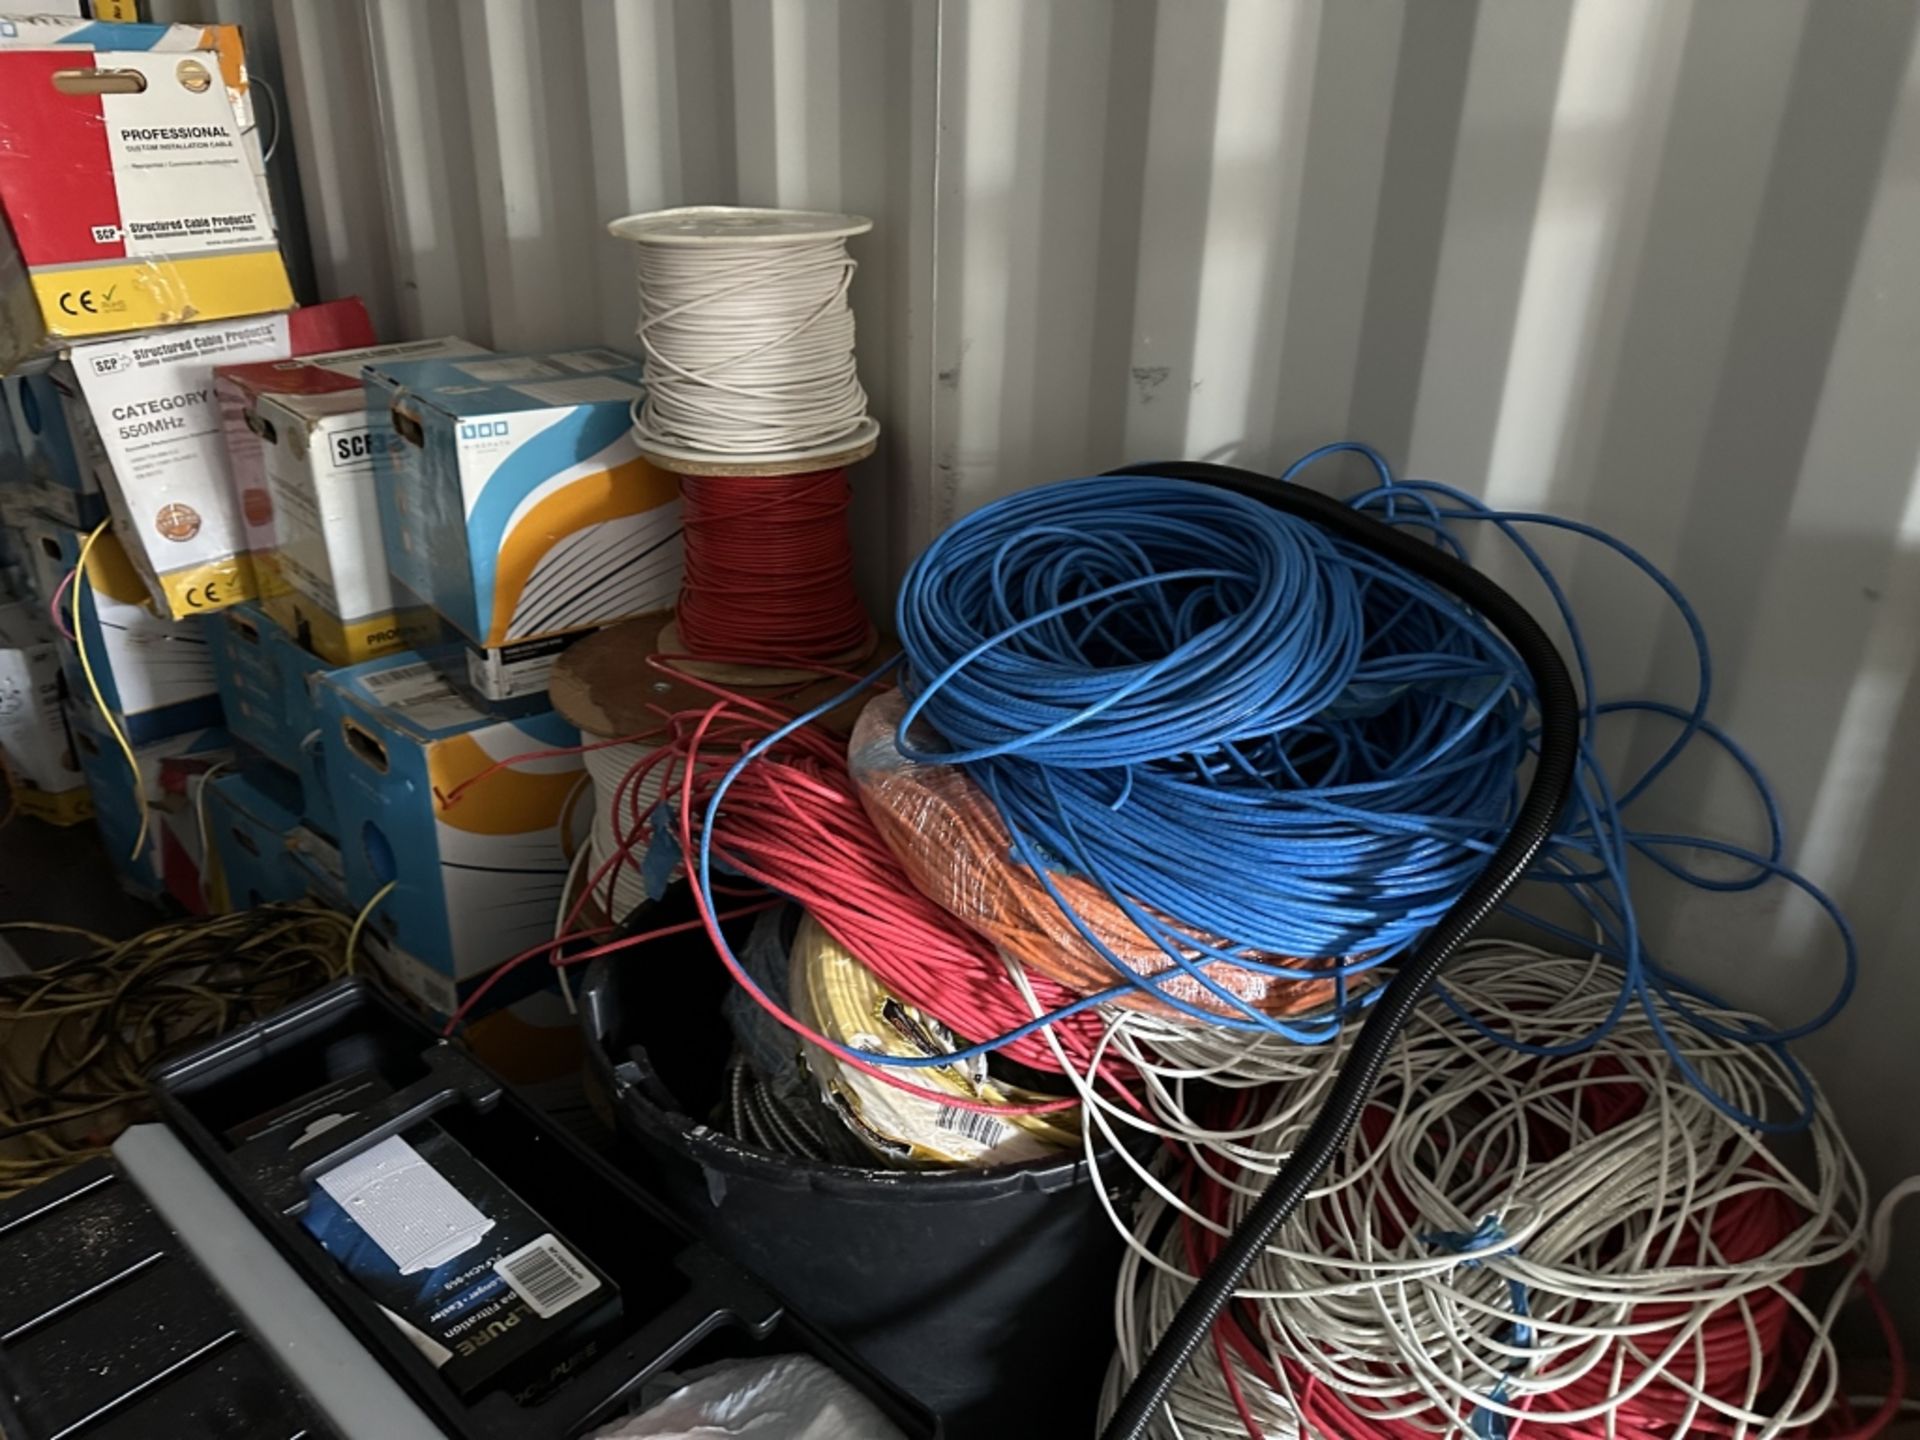 LOT CONSISTING OF VARIOUS SPOOLS/BOXES OF CABLE - Image 2 of 3